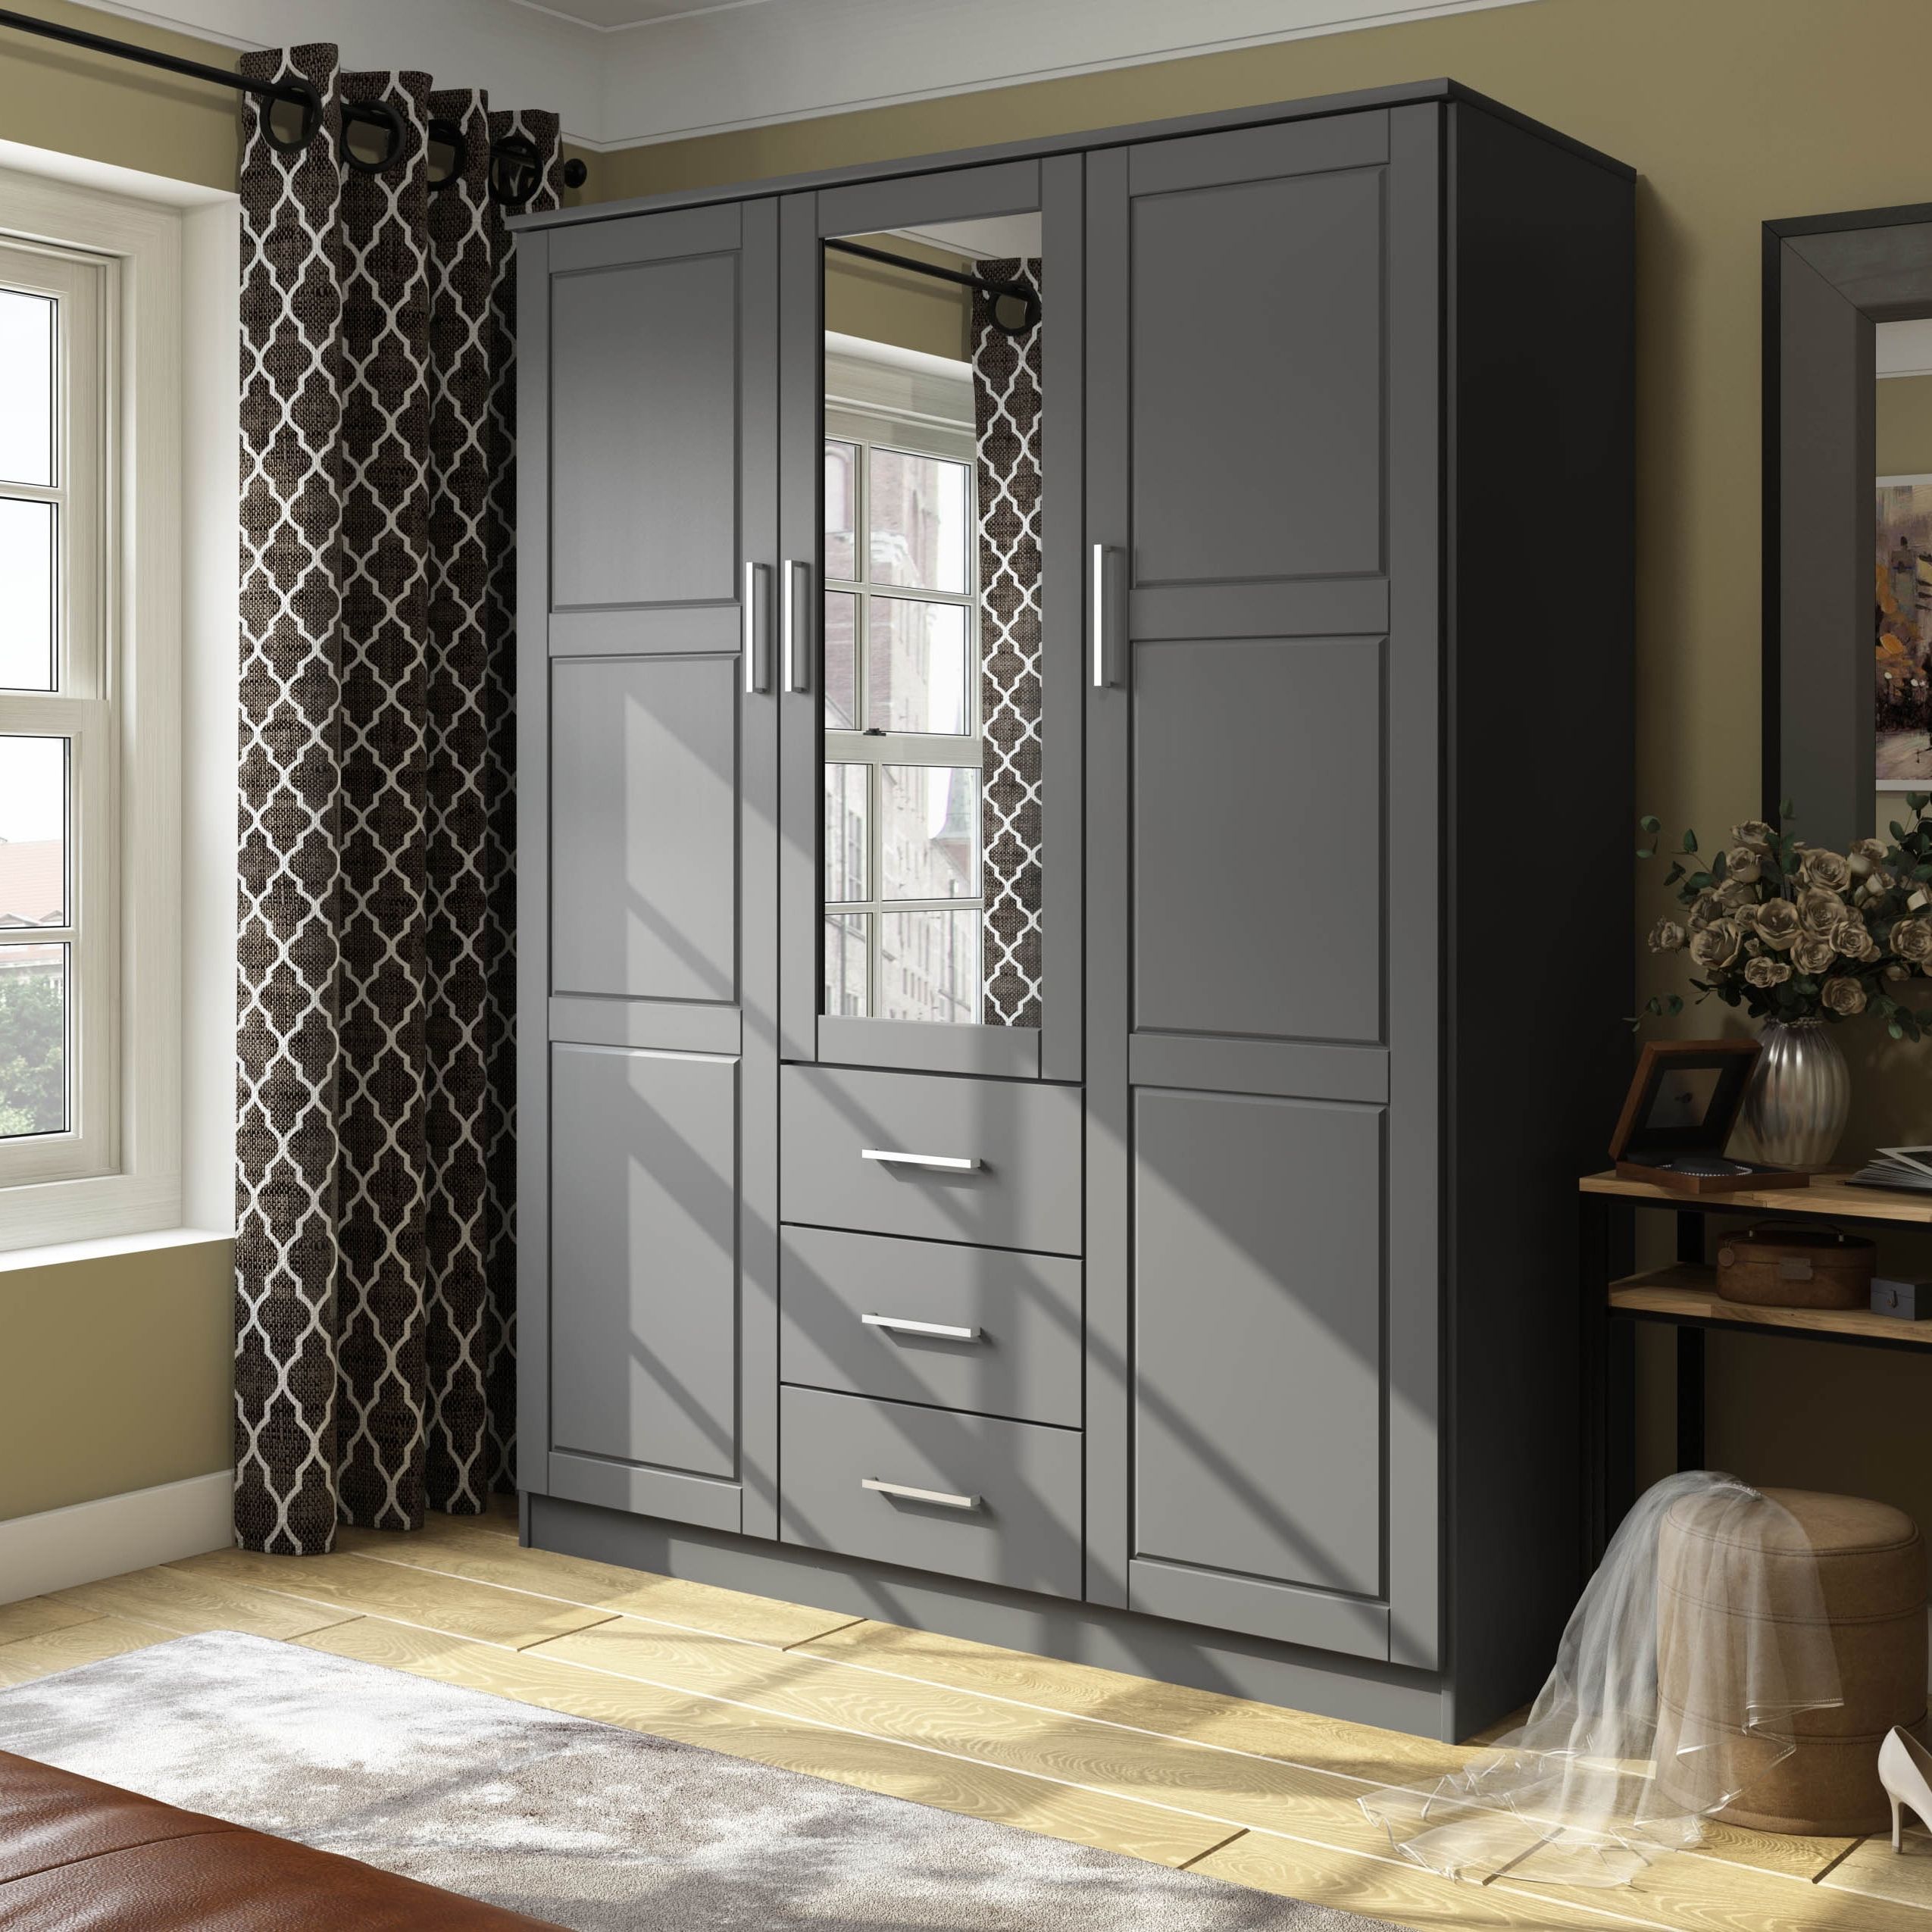 Palace Imports 100% Solid Wood Cosmo 3 Door Wardrobe Armoire With Solid  Wood Or Mirrored Doors – Bed Bath & Beyond – 27120317 With Regard To 3 Door Wardrobes With Drawers And Shelves (Gallery 7 of 20)